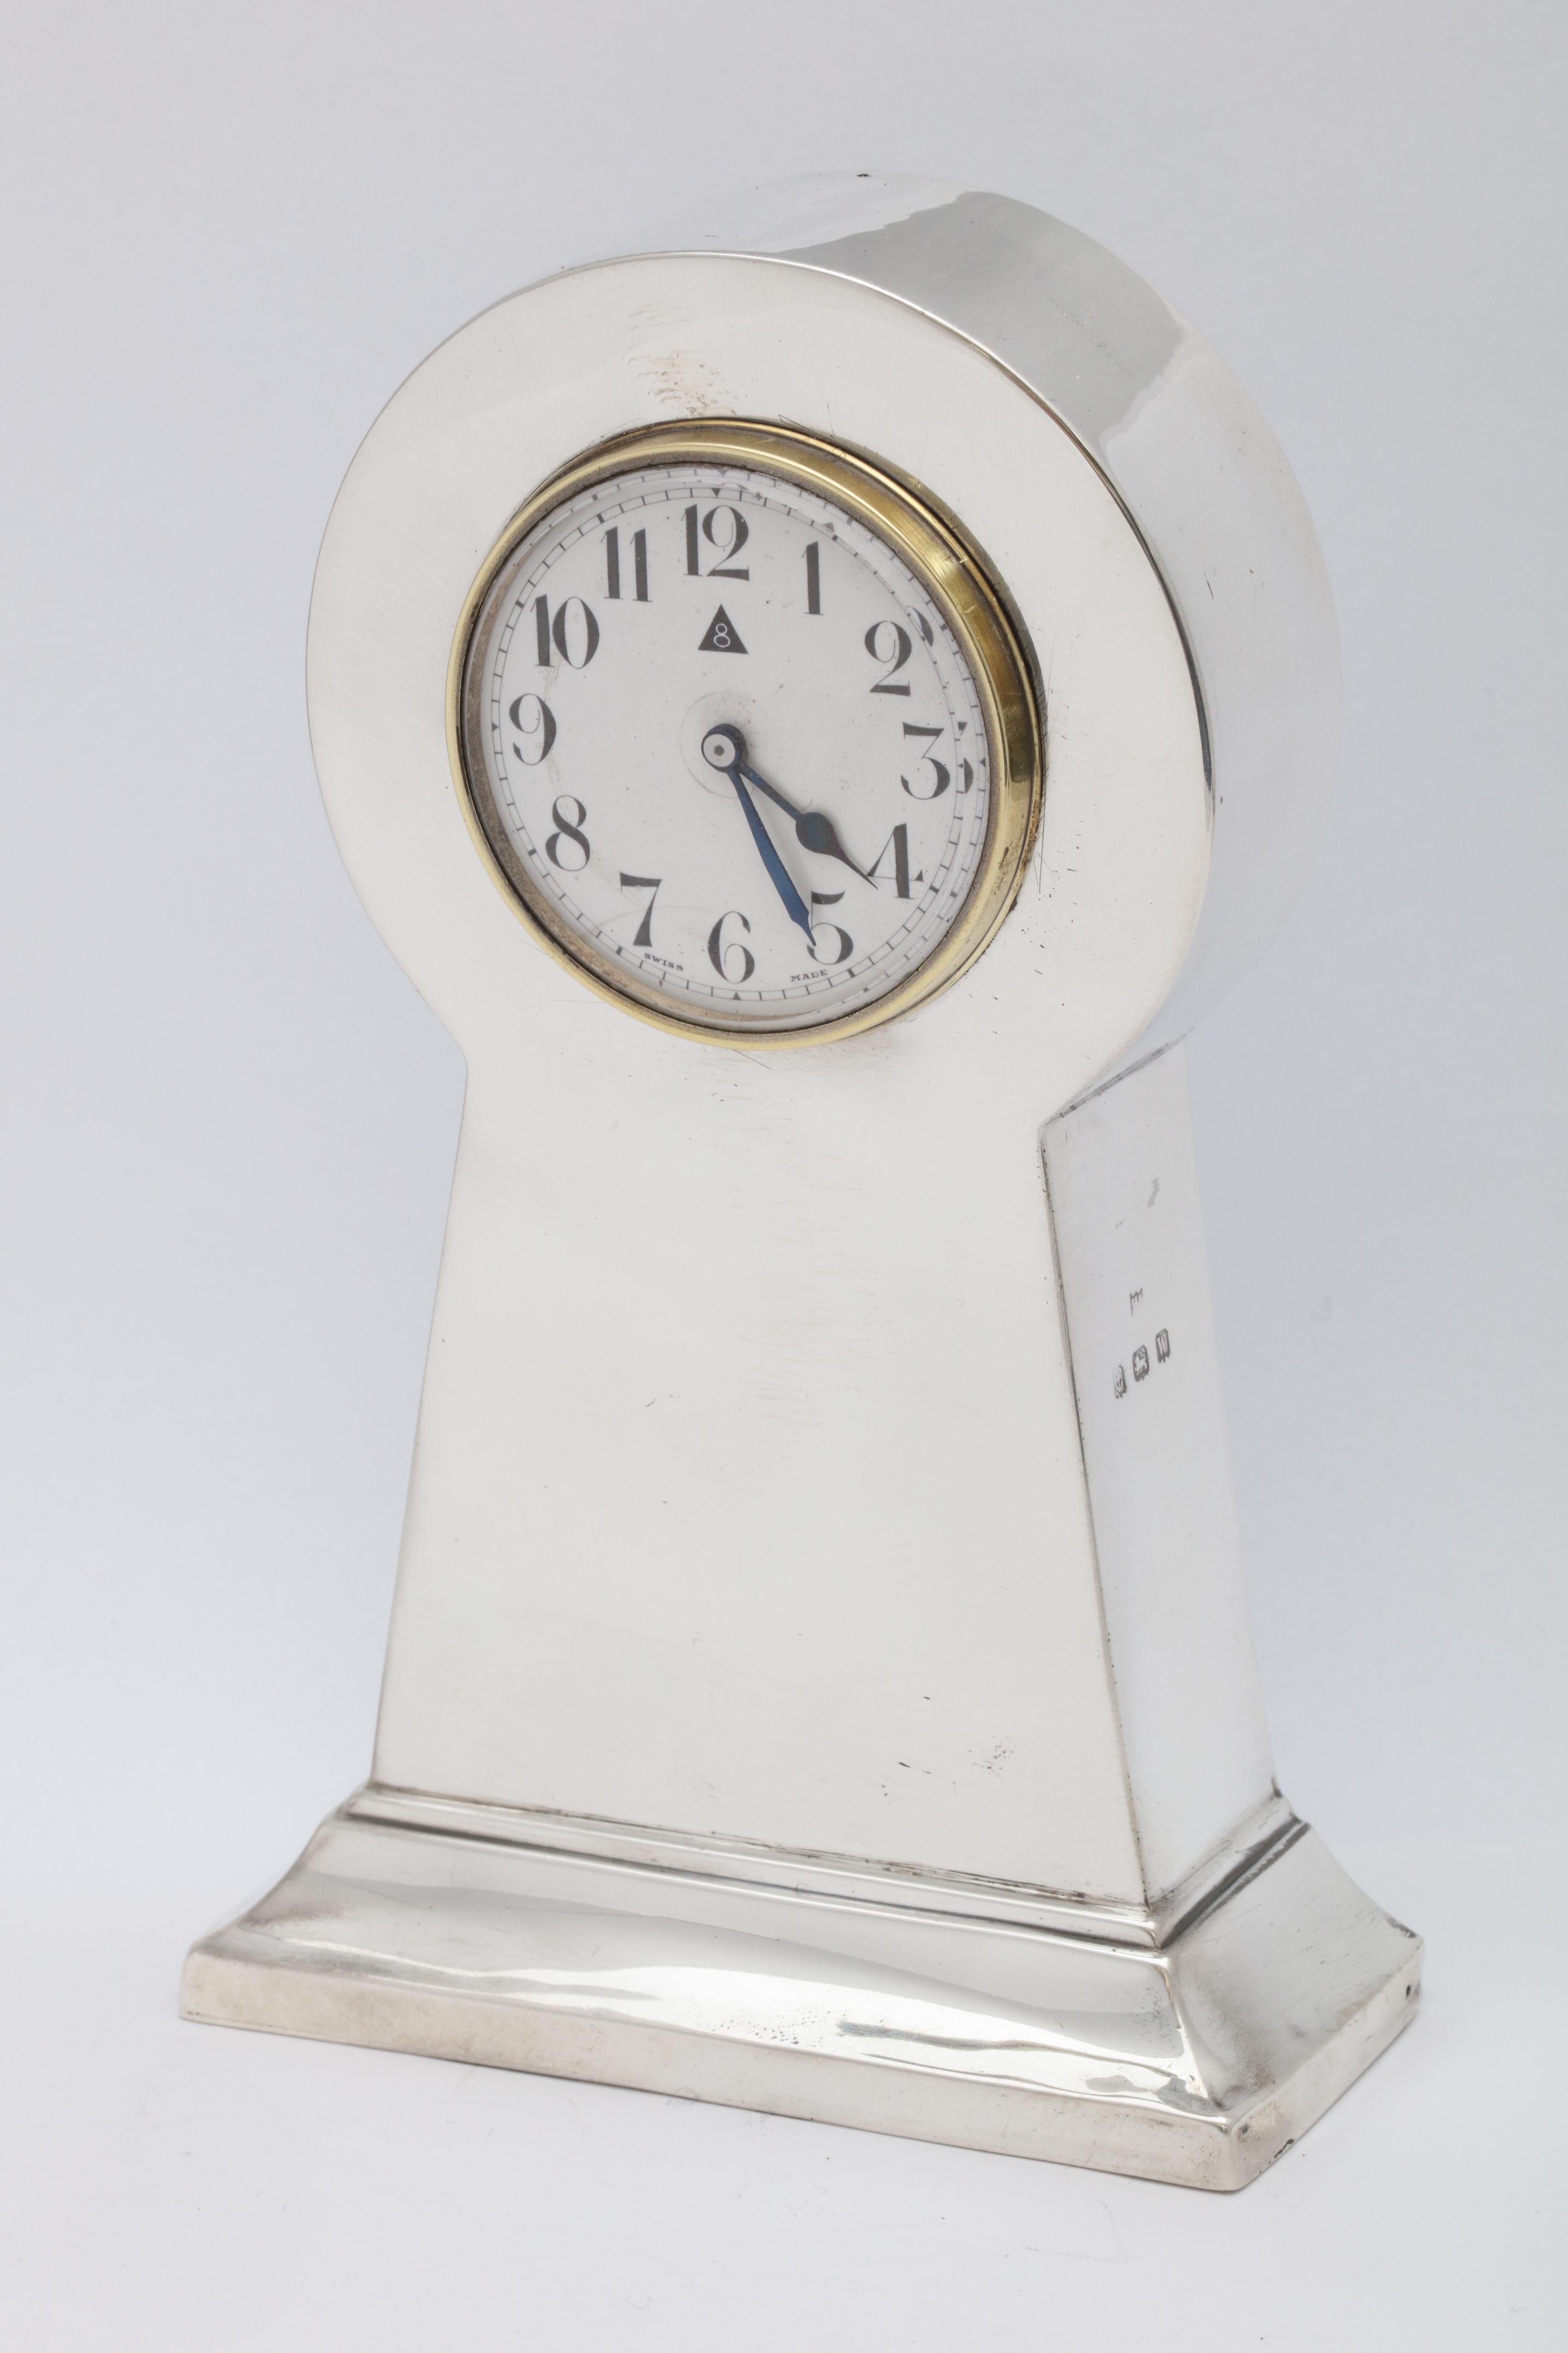 Art Deco, sterling silver, 8-day table clock, Birmingham, England, 1921, Charles S. Green and Co. - makers. Measures: Stands 5 1/2 inches high x 3 1/2 inches wide x over 1 1/2 inches deep. Has a few minor dints in the sterling silver and some